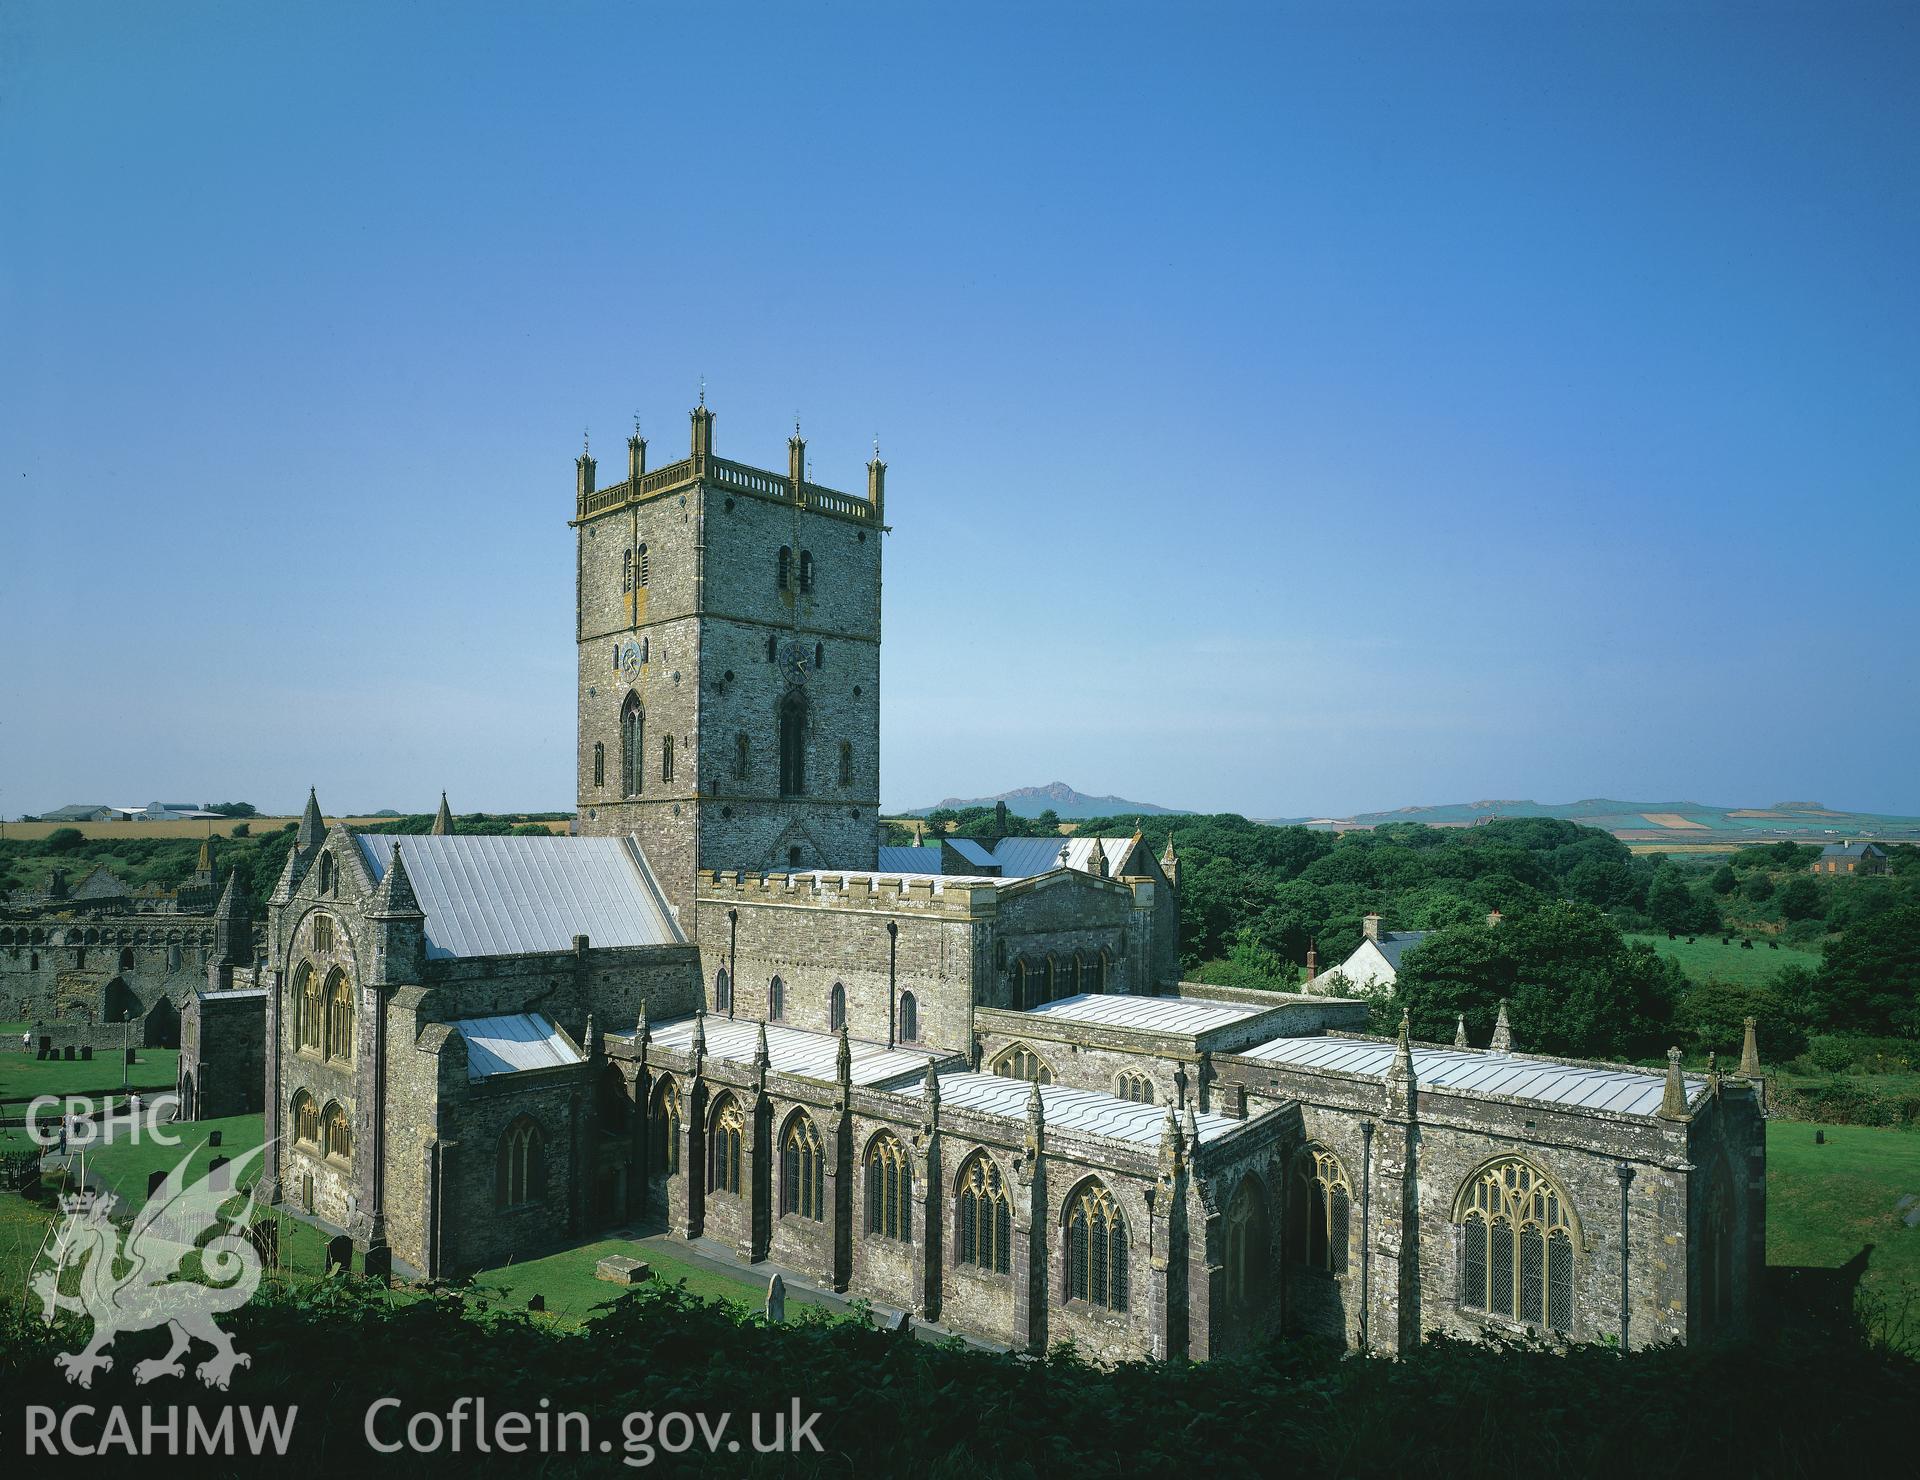 RCAHMW colour transparency of an exterior view of St David's Cathedral.